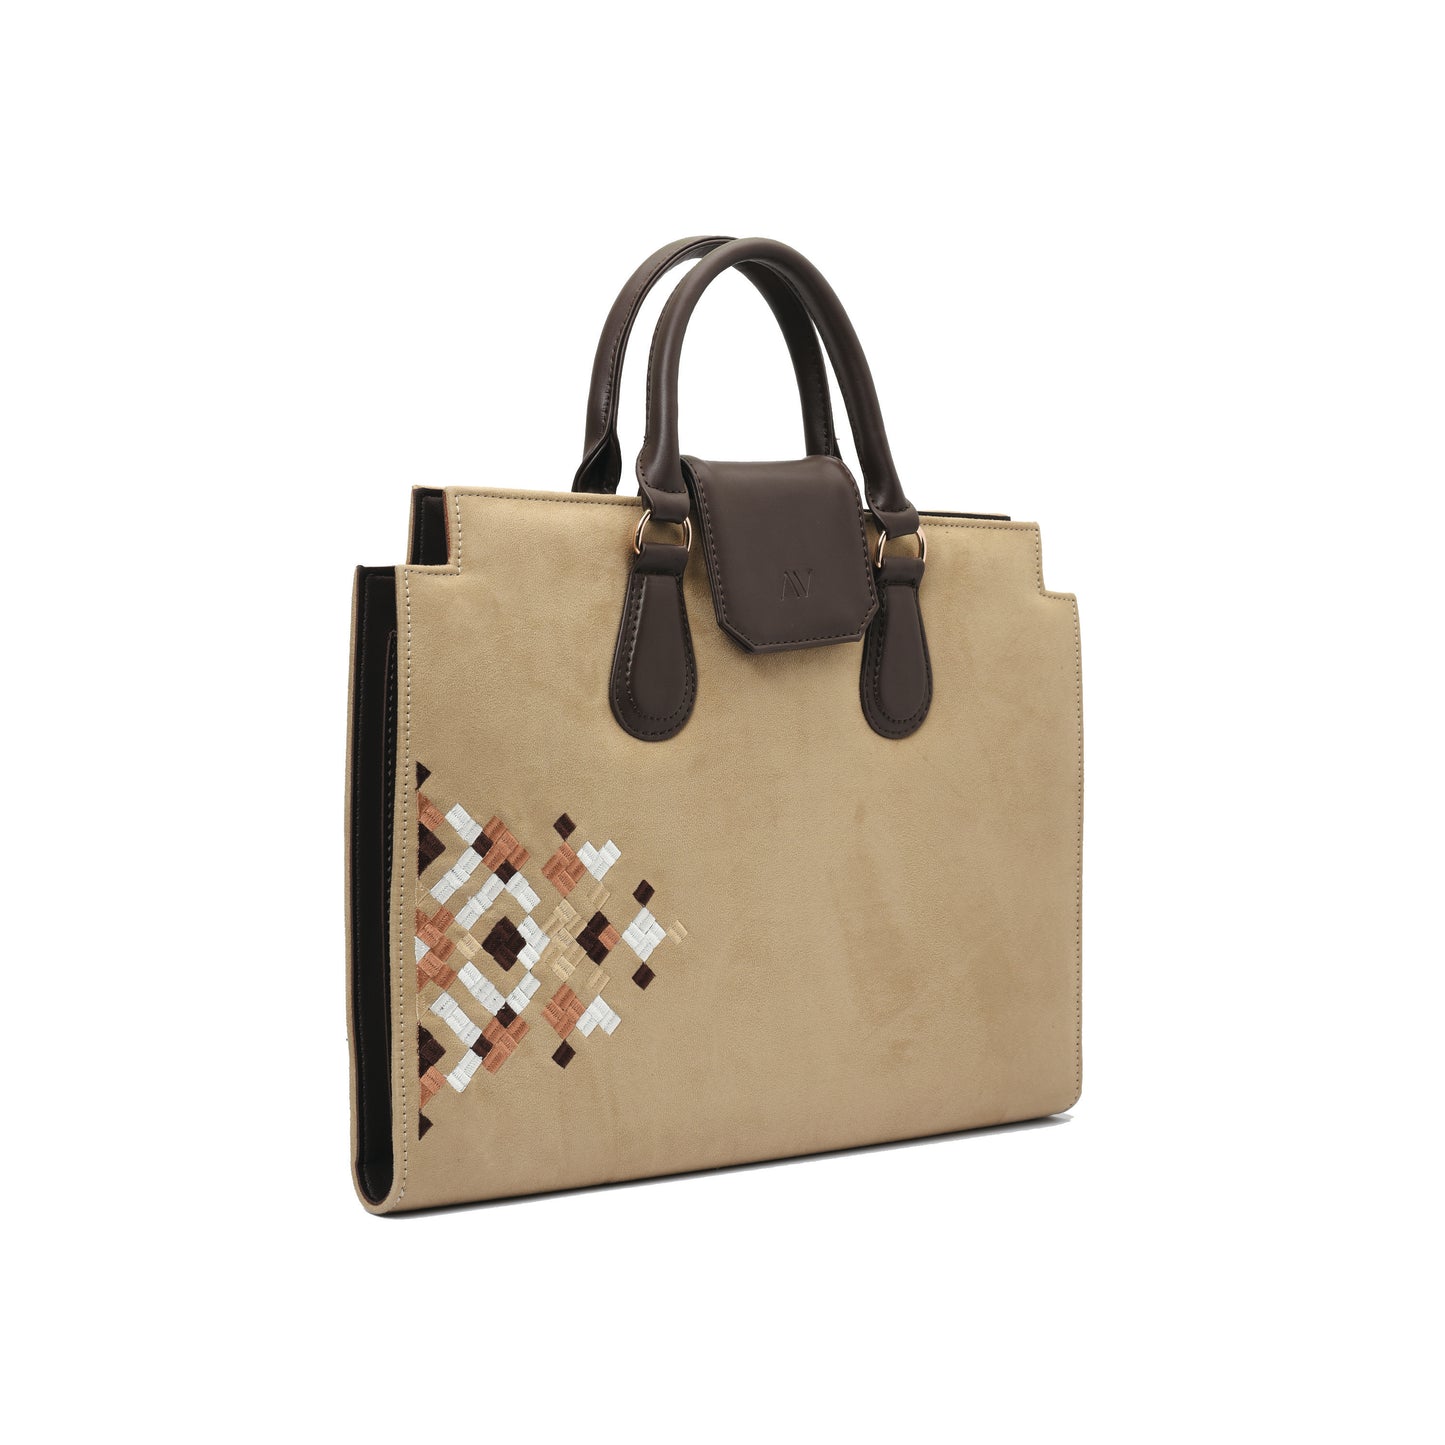 Beige Laptop File Bag with embroideries - Code 2202